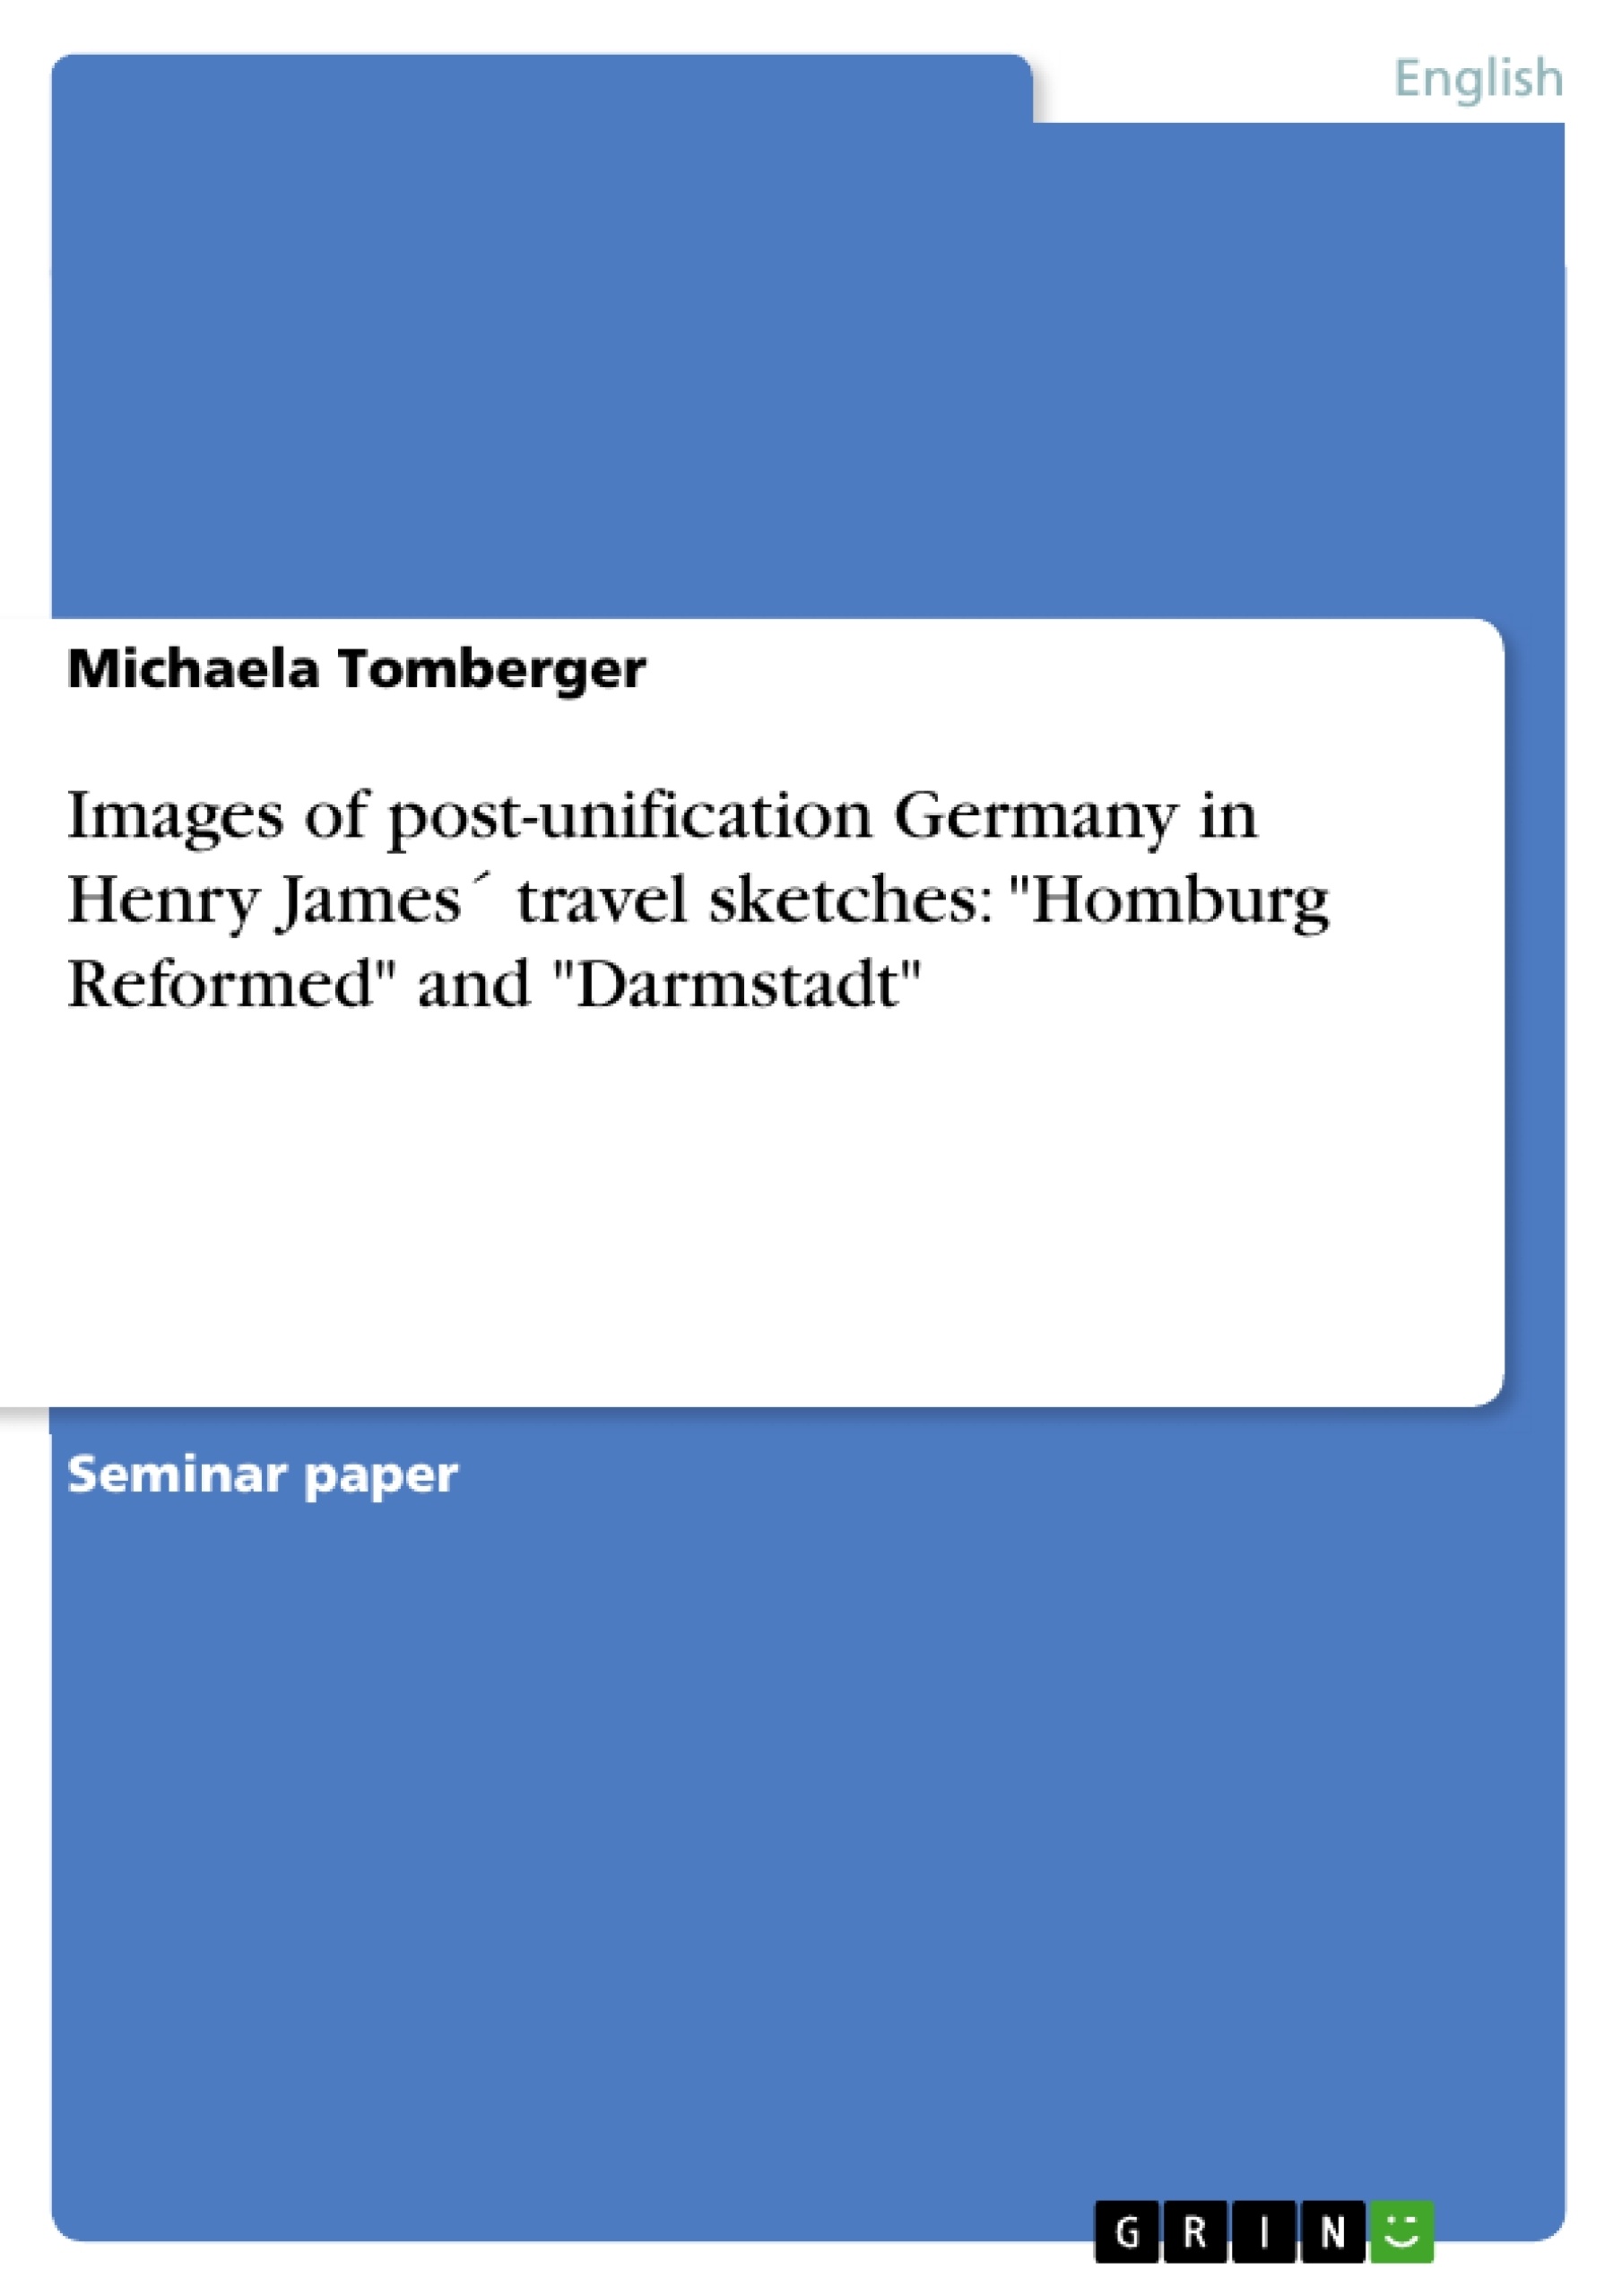 Title: Images of post-unification Germany in Henry James´ travel sketches: "Homburg Reformed" and "Darmstadt"